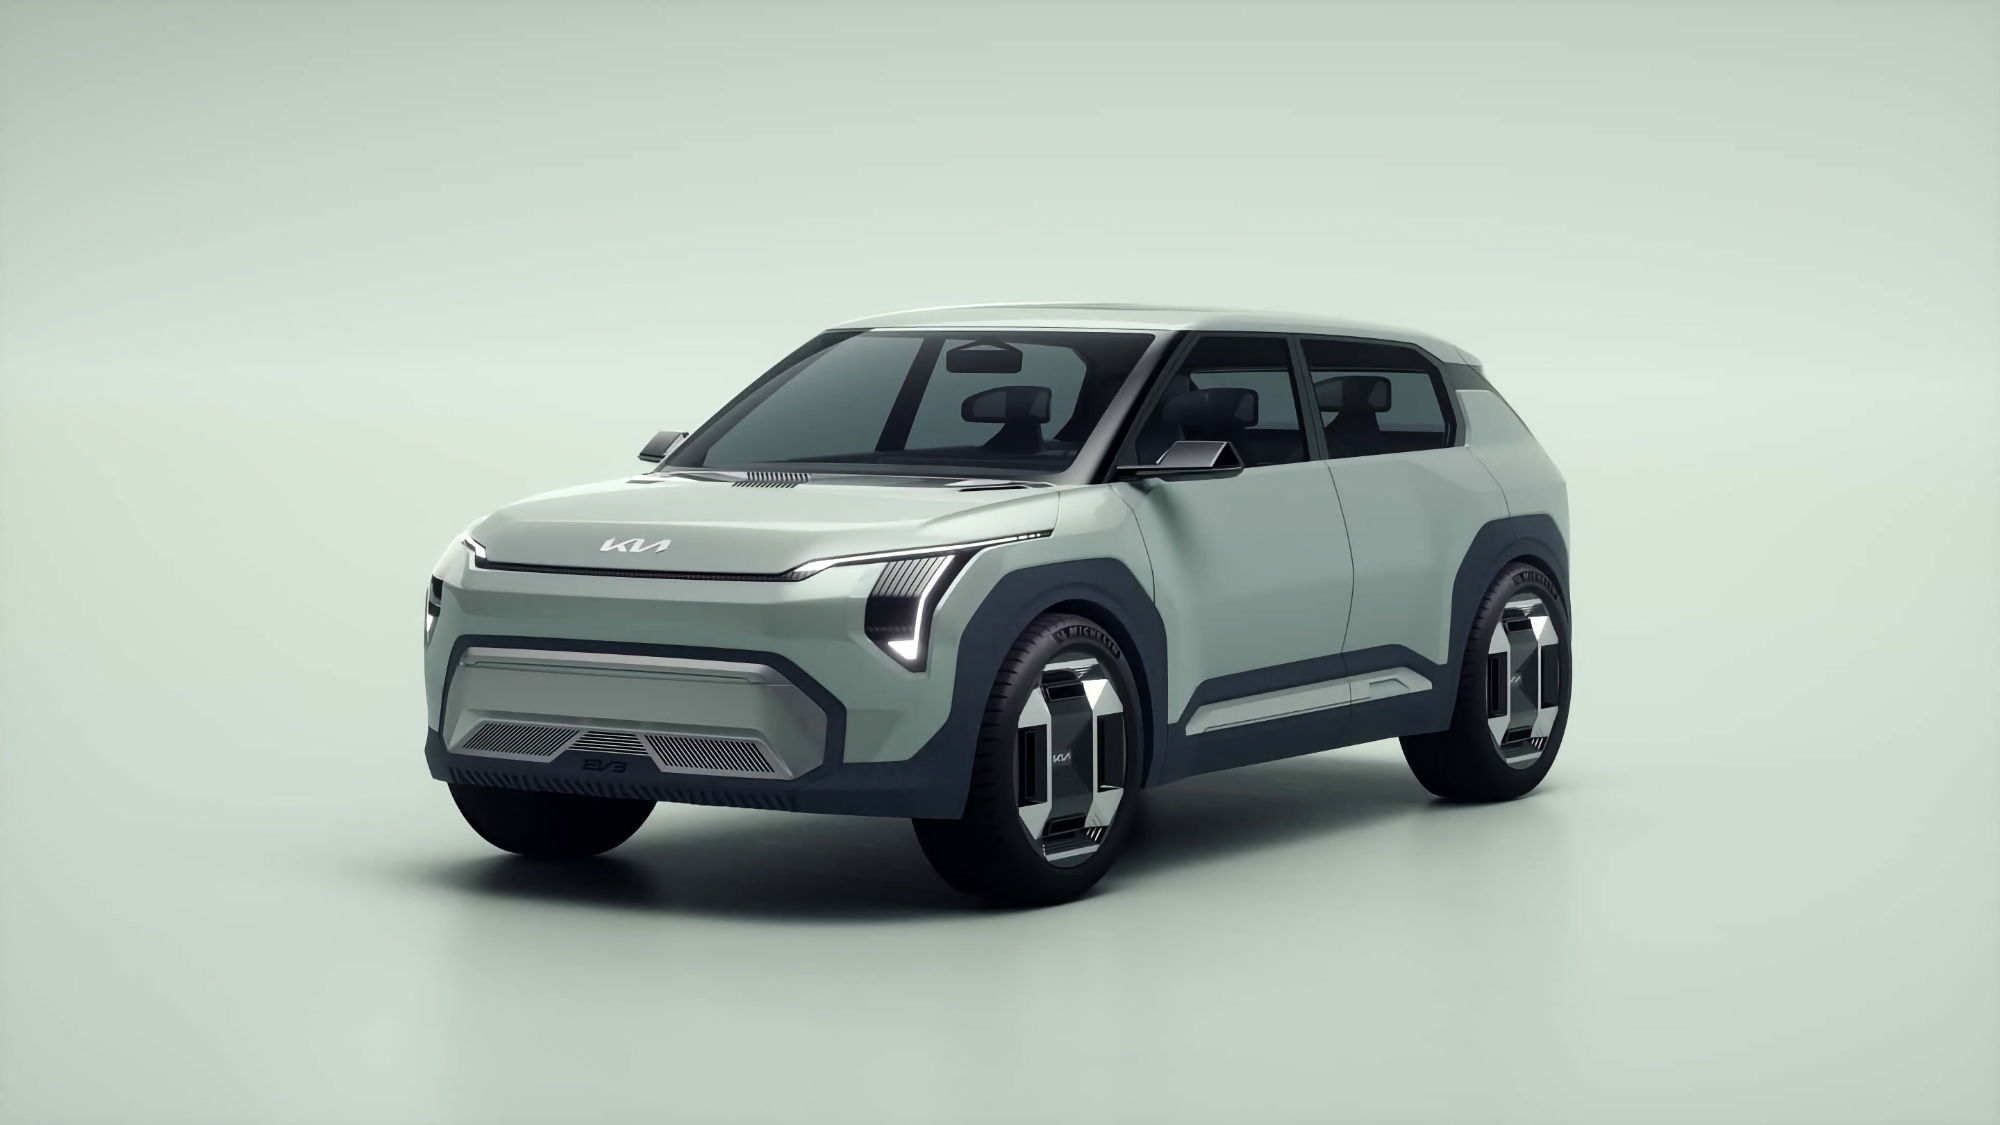 Kia's EV3 compact electric crossover will make its debut on 23 May